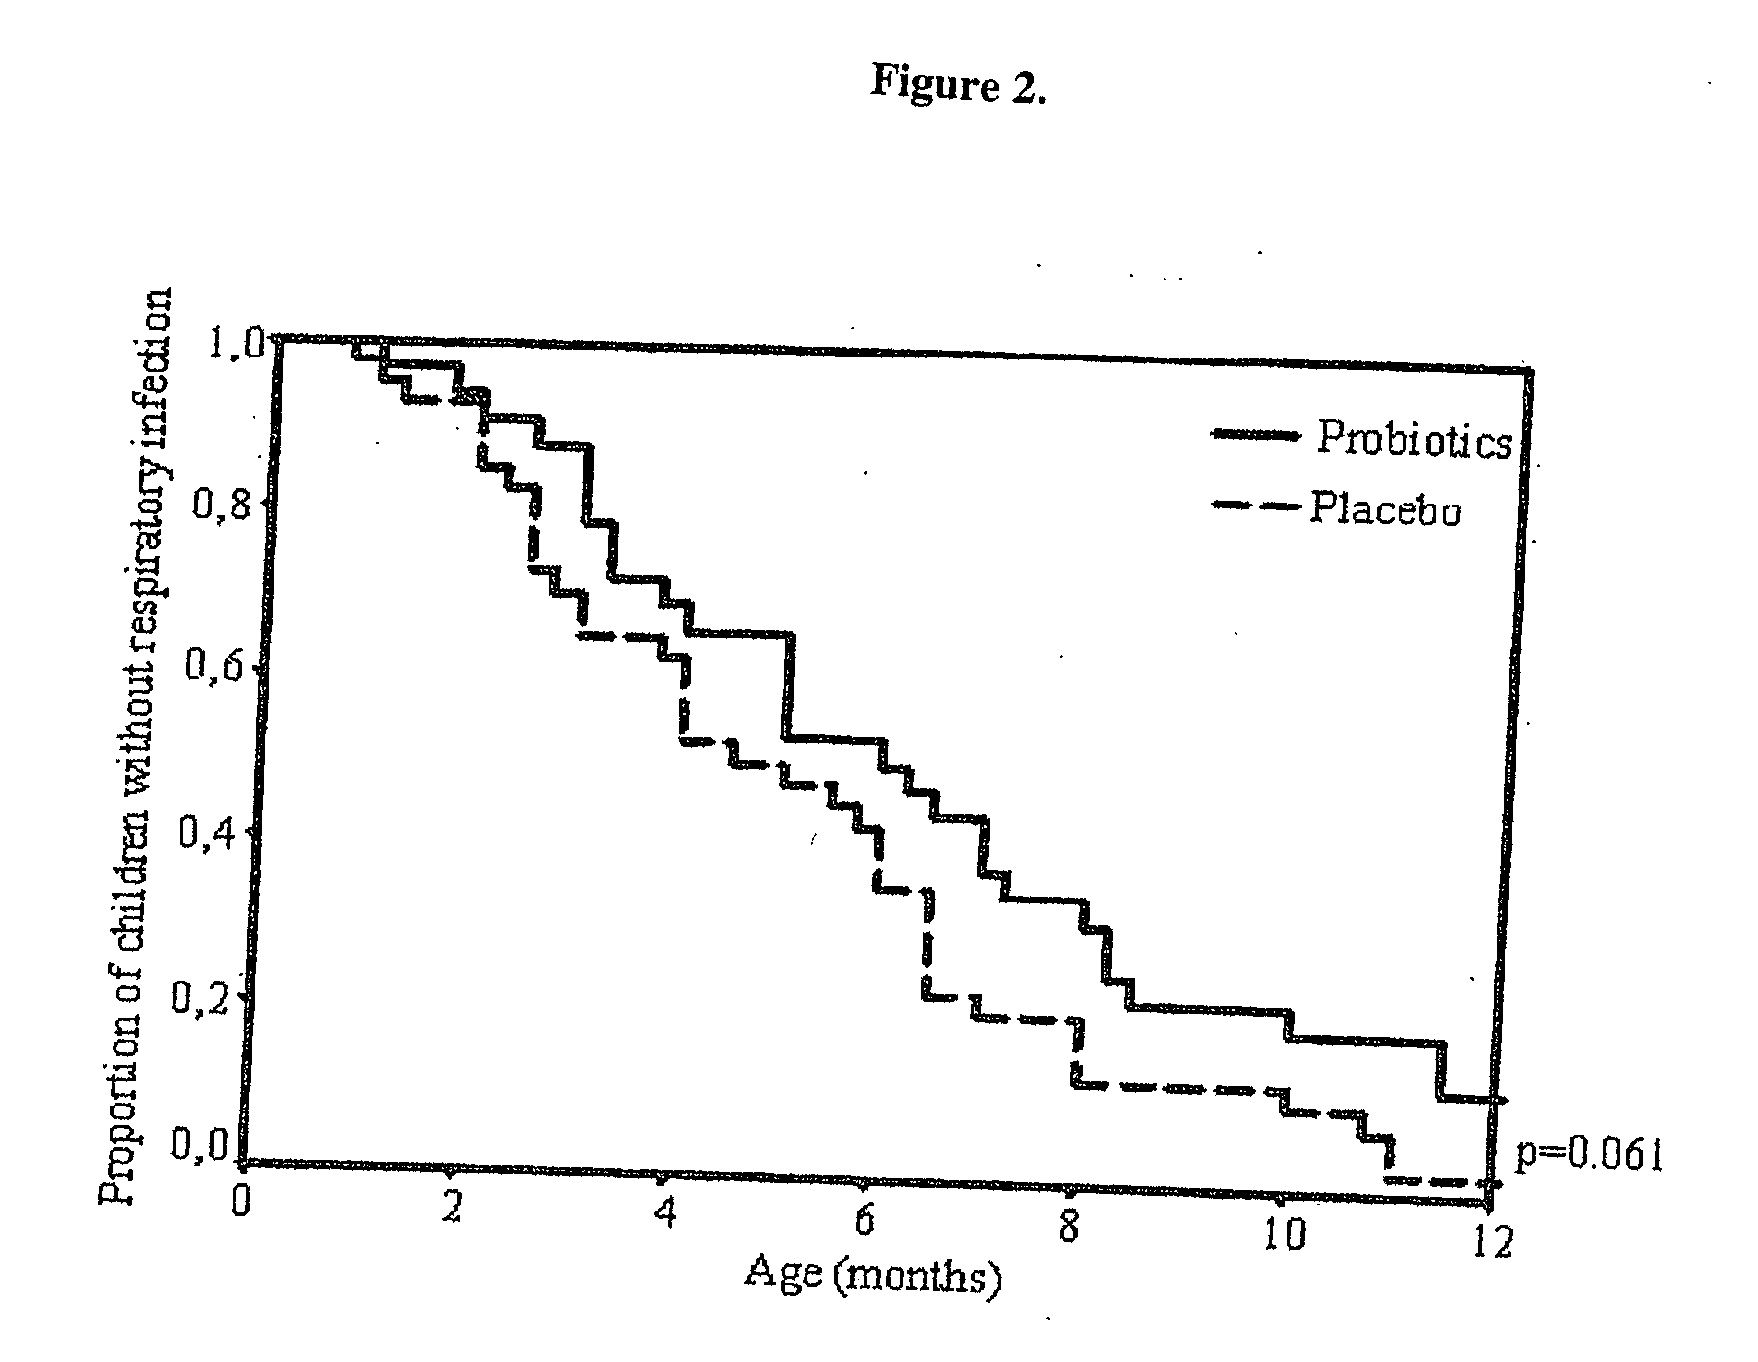 Method for preventing or treating respiratory infections and acute otitis media in infants